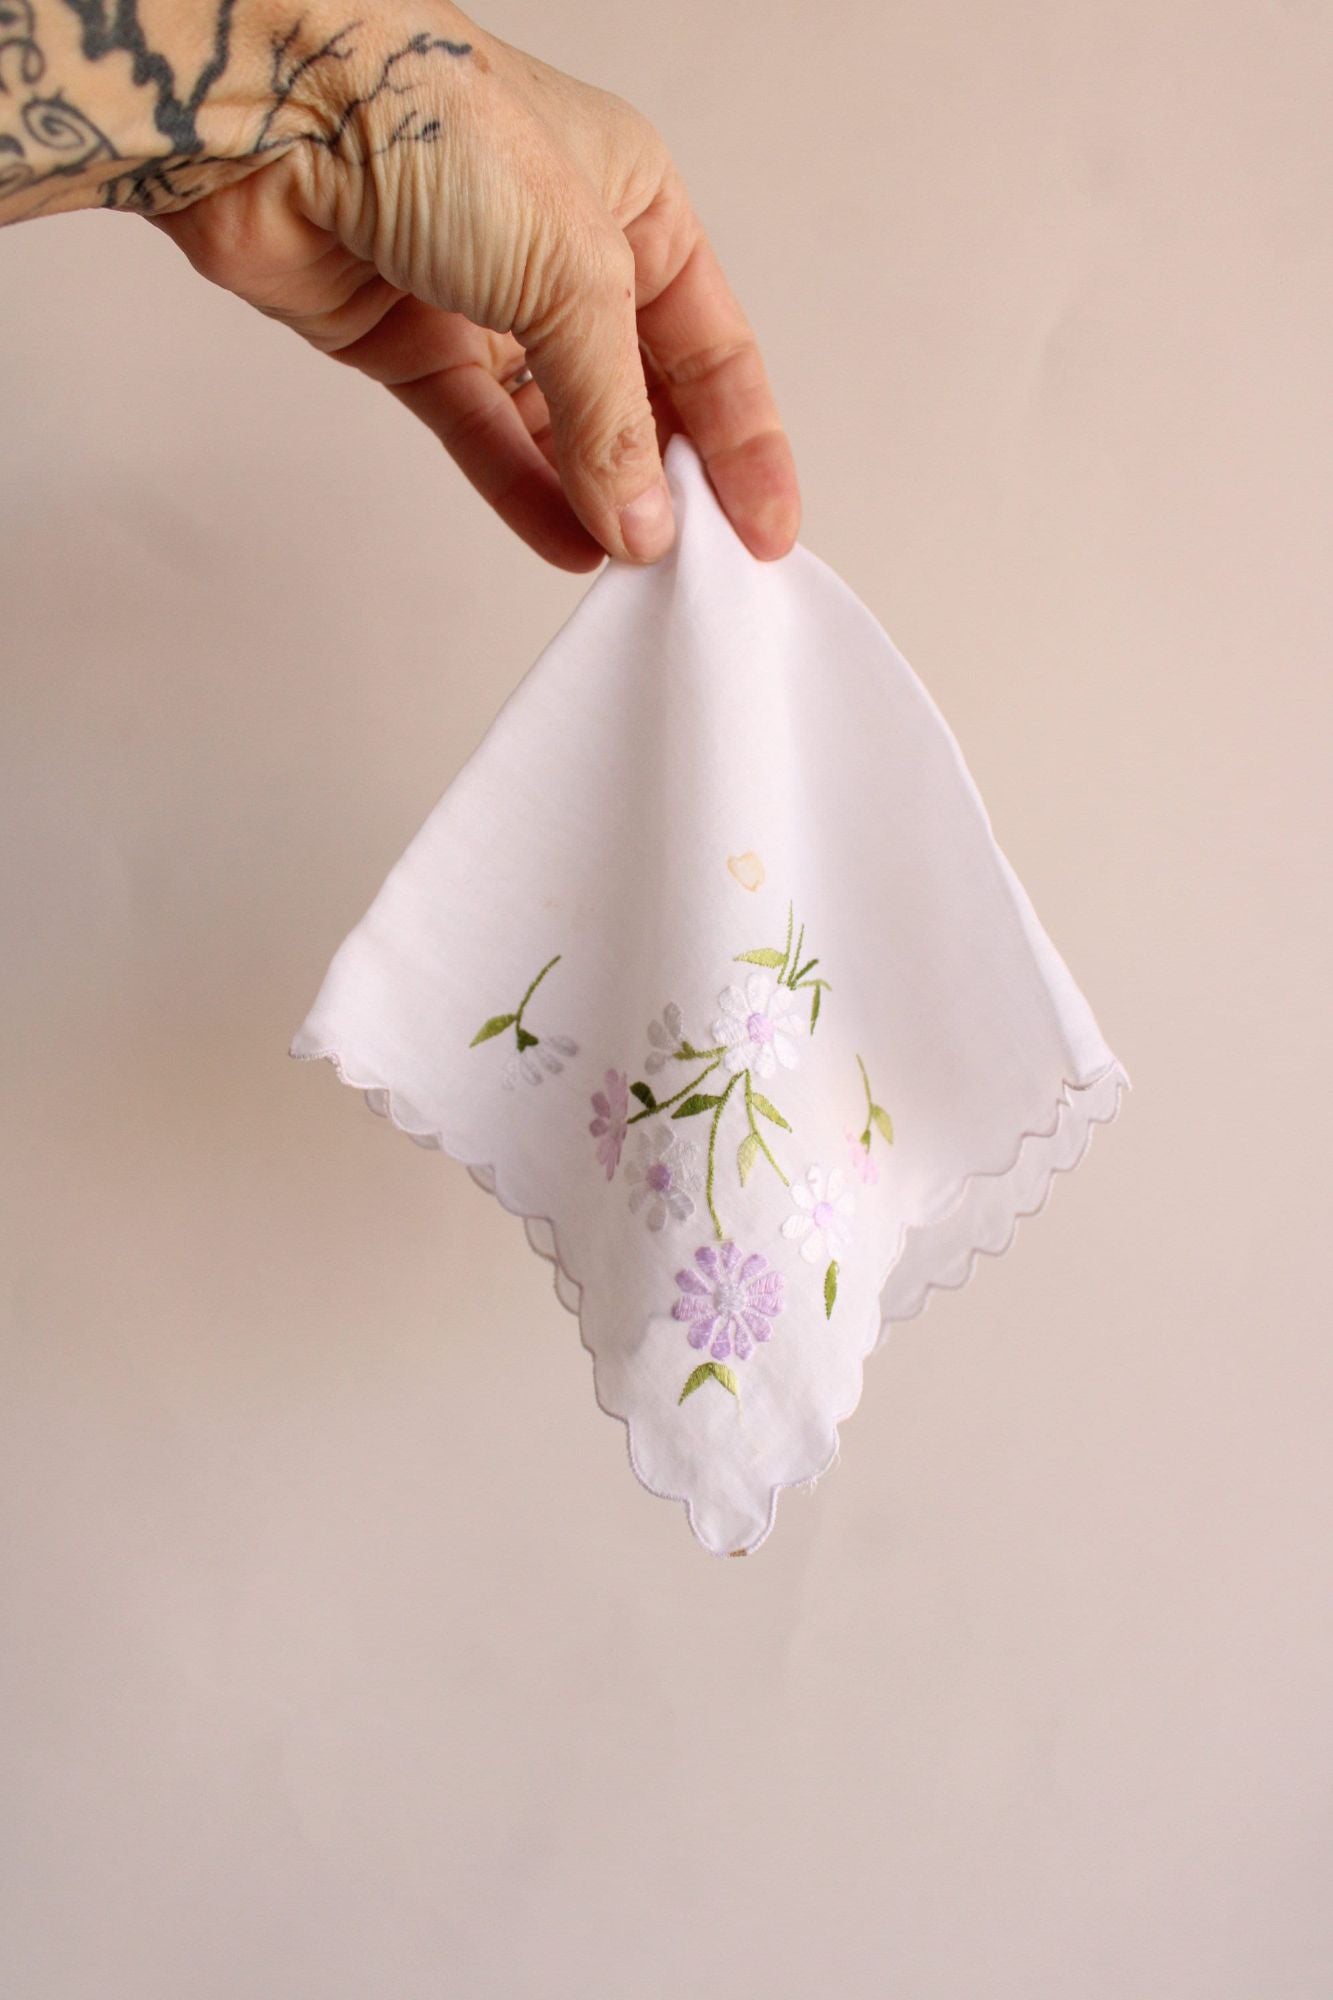 Vintage Handkerchief with Purple and White Daisy Flower Embroidery